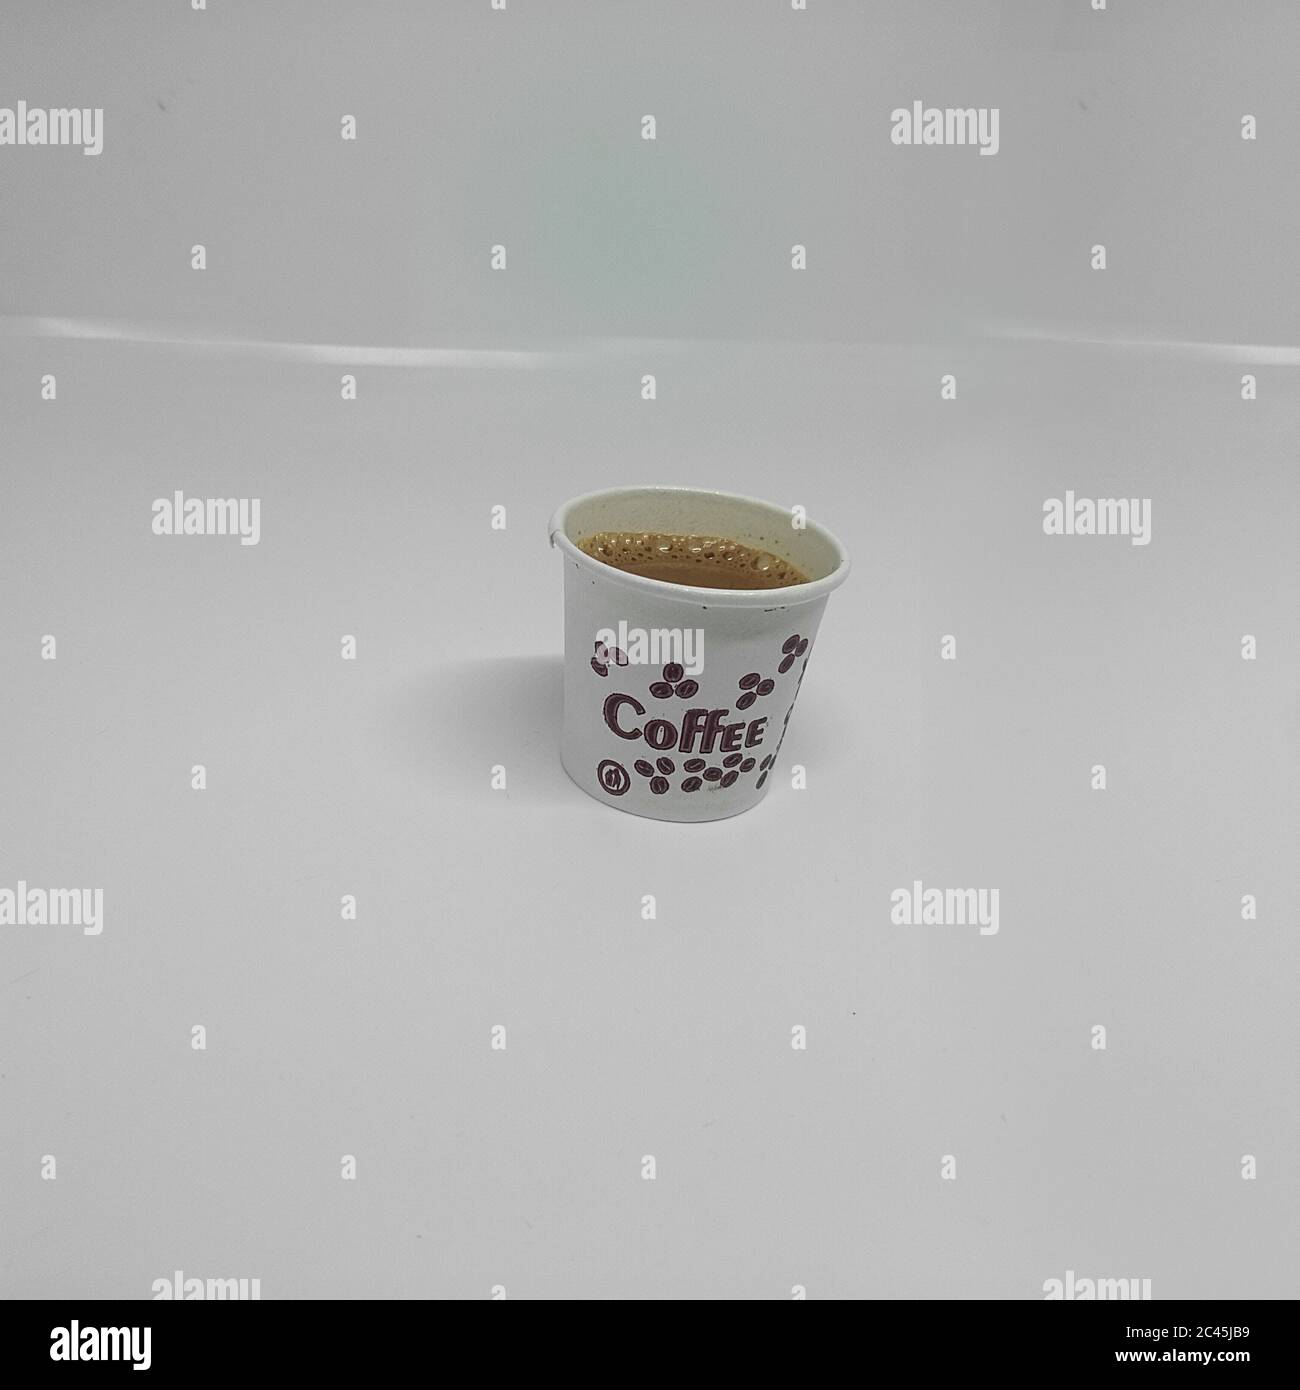 Tea Paper Cup, Coffee Paper Cup, with tea and white background Stock Photo